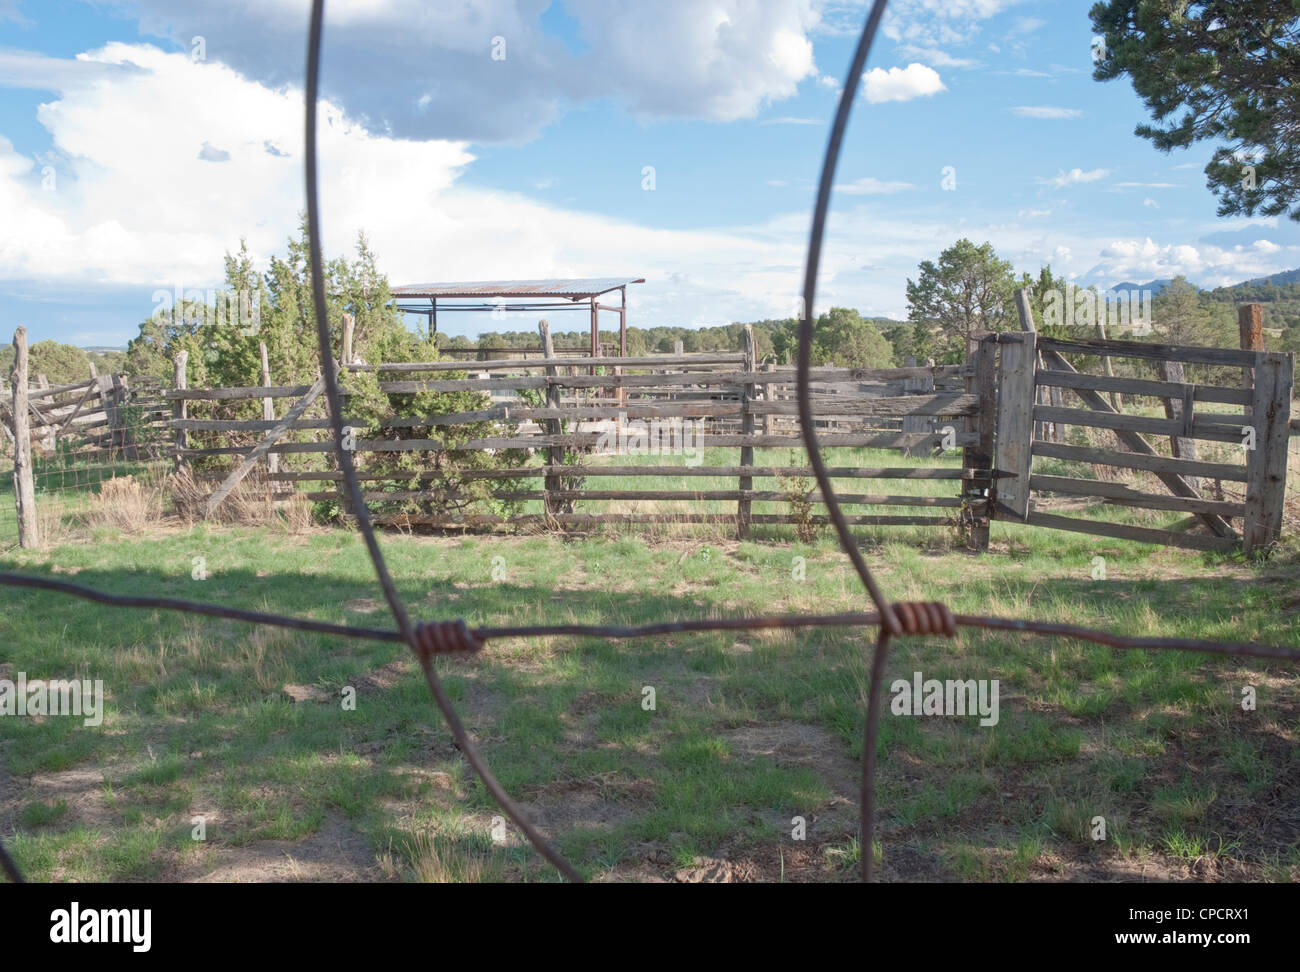 Wooden fencing and barbed wire enclose a loading area for cattle. Stock Photo